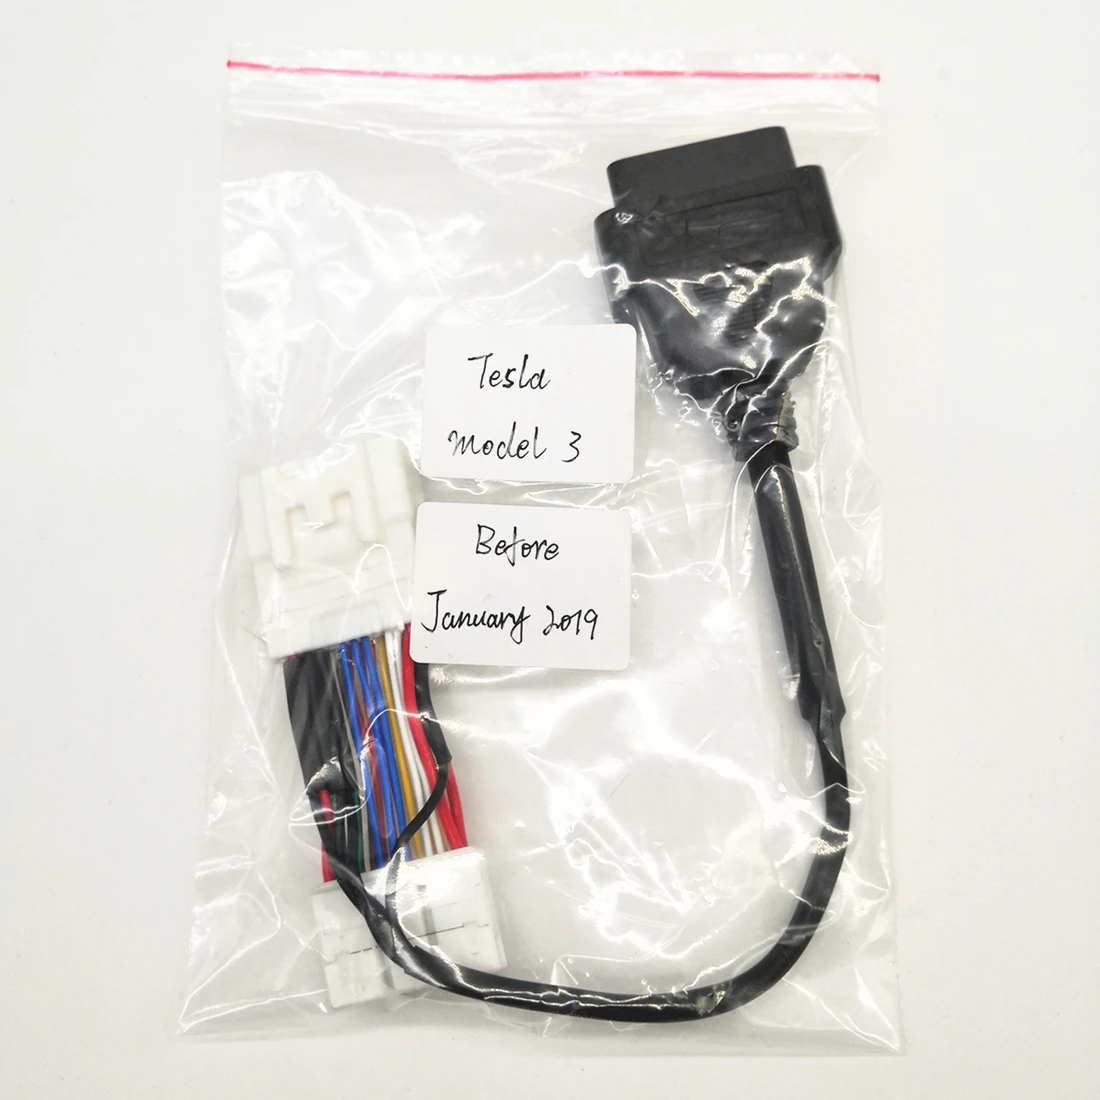 20 Pin Male Female Connector Before January 2019 Tesla Model 3 OBD II Diagnostic Harness Electric Cable 6098-5622/6098-5613